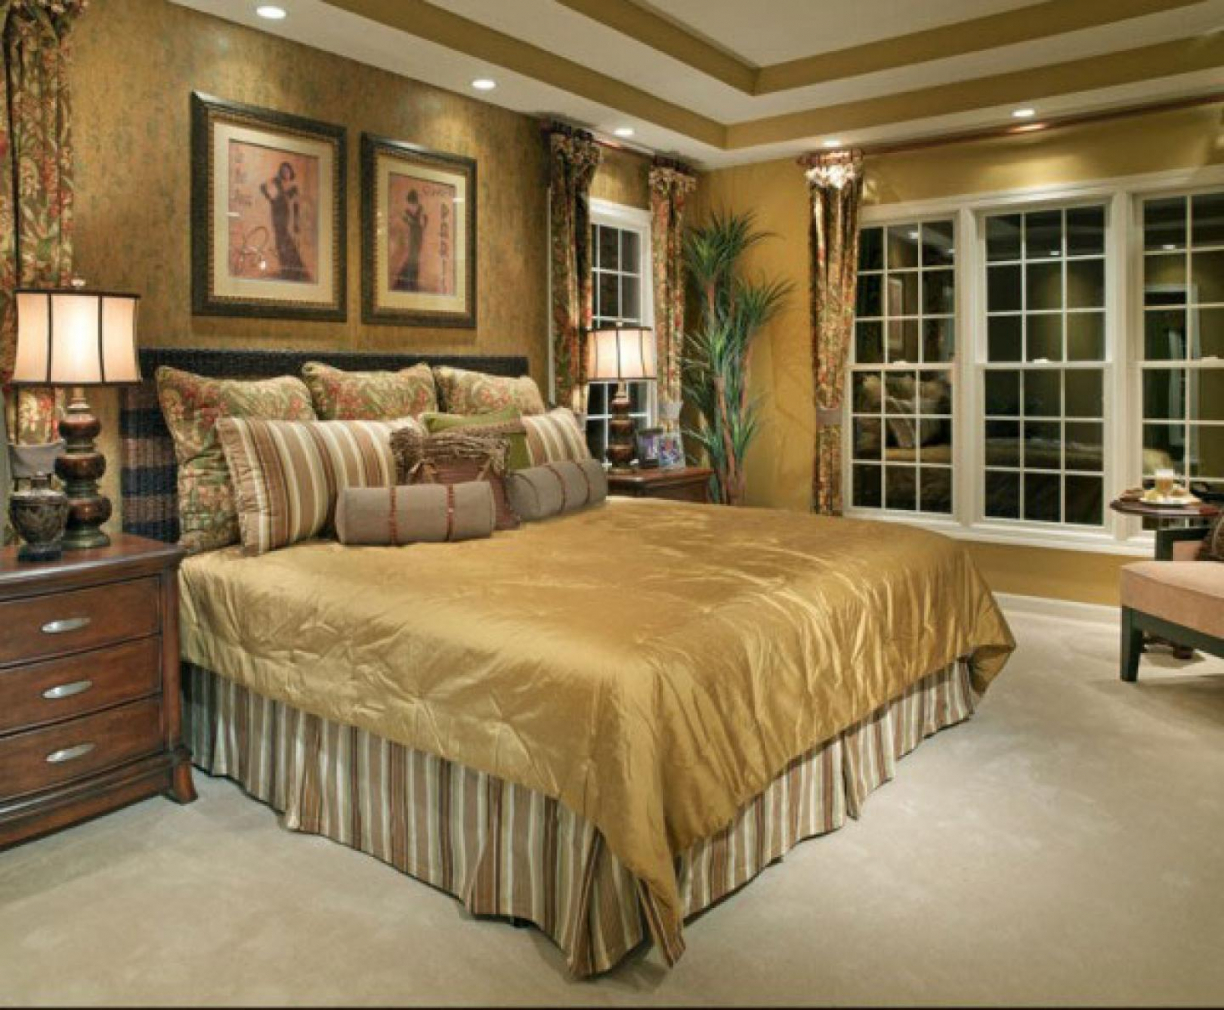 traditional home bedroom images photo - 6